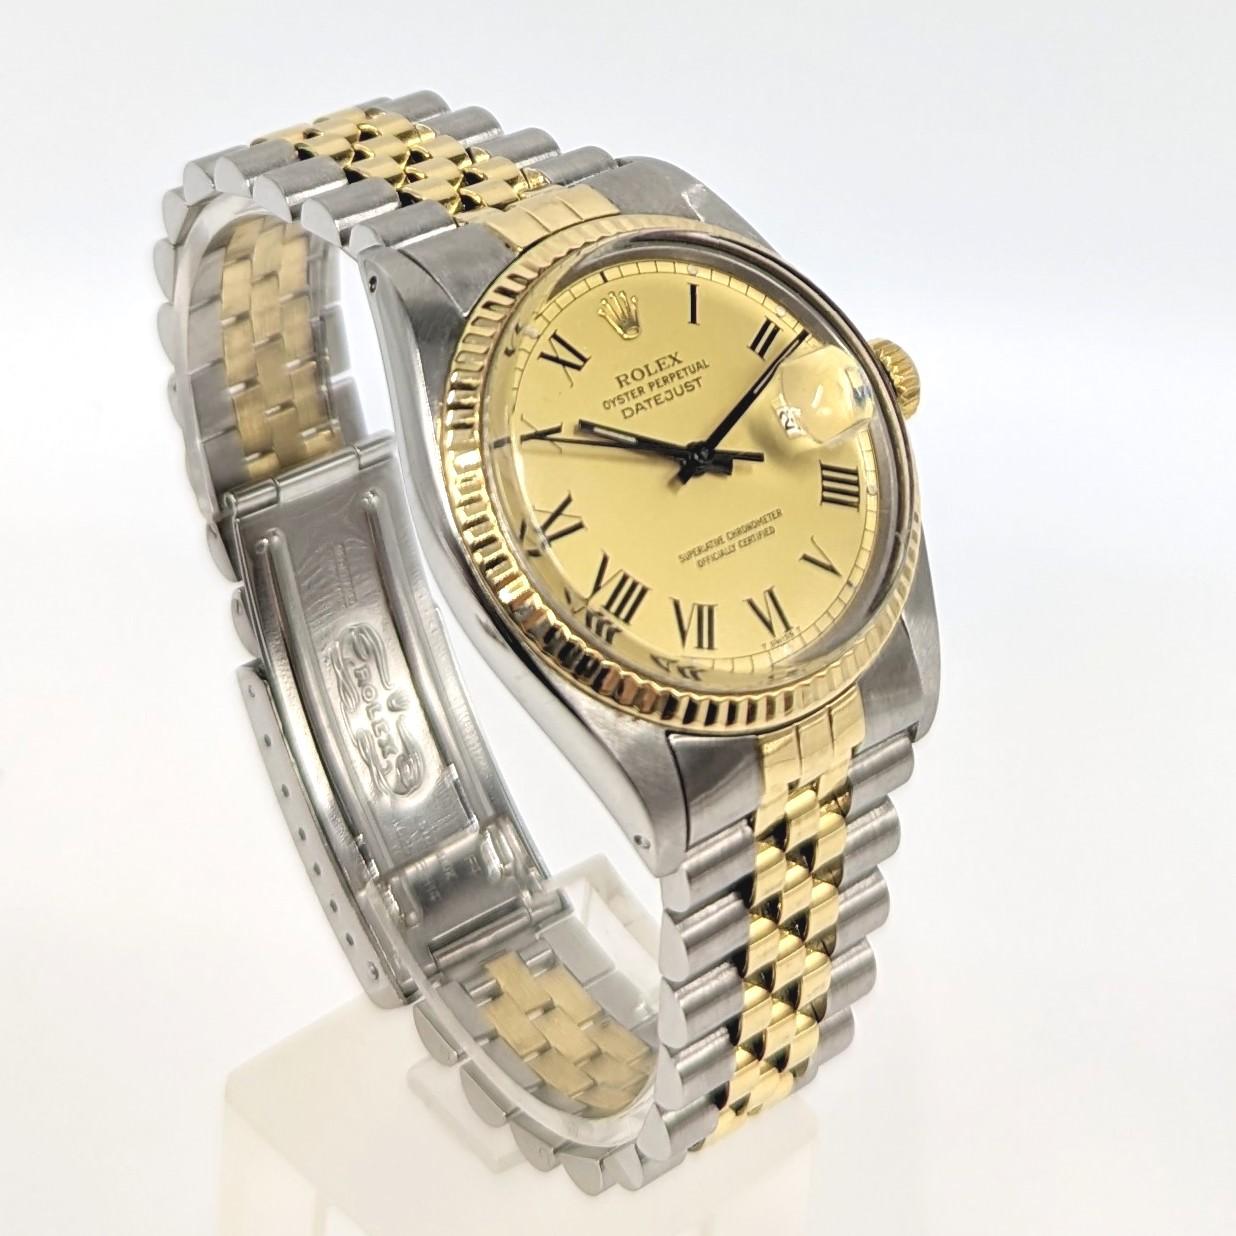 A fine and collectible Gent's Rolex Oyster Perpetual Datejust wristwatch in 